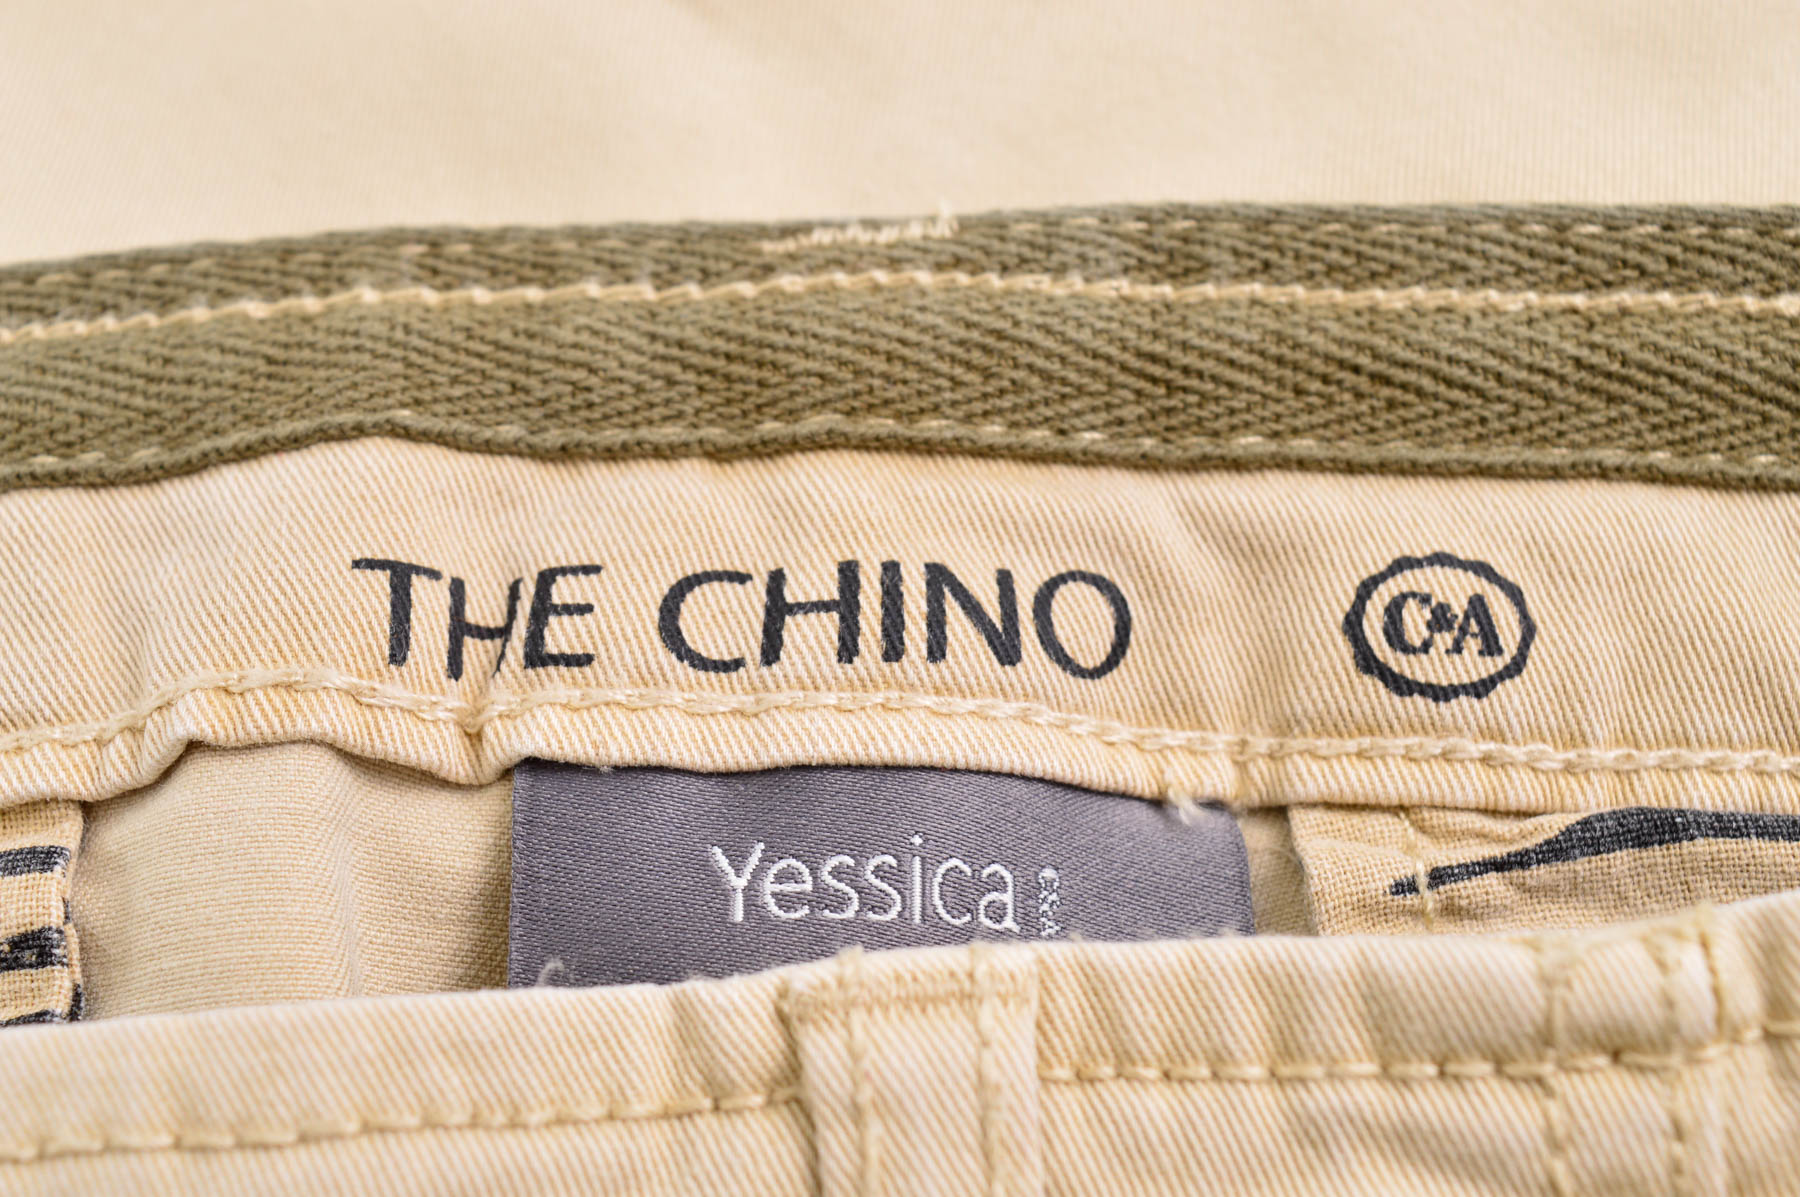 Men's trousers - Yessica - 2